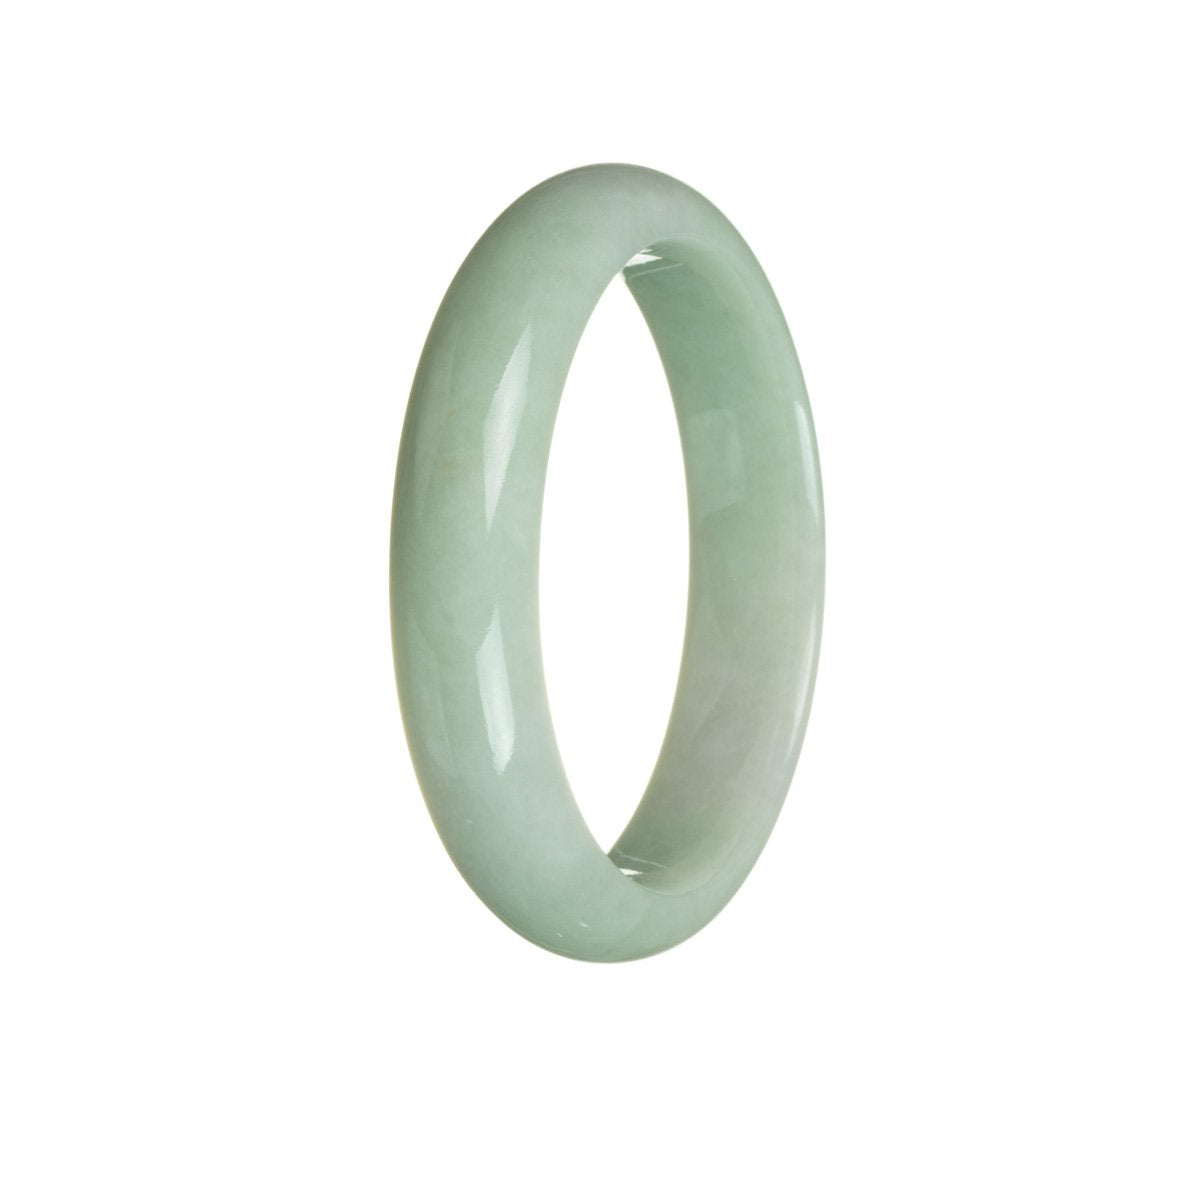 Image: A close-up view of a green jade bangle bracelet with a half-moon shape, measuring 59mm in diameter. The bracelet has a smooth and polished surface, showcasing the natural beauty of the green jade stone. It is certified as natural and genuine, making it a valuable and authentic piece of jewelry.